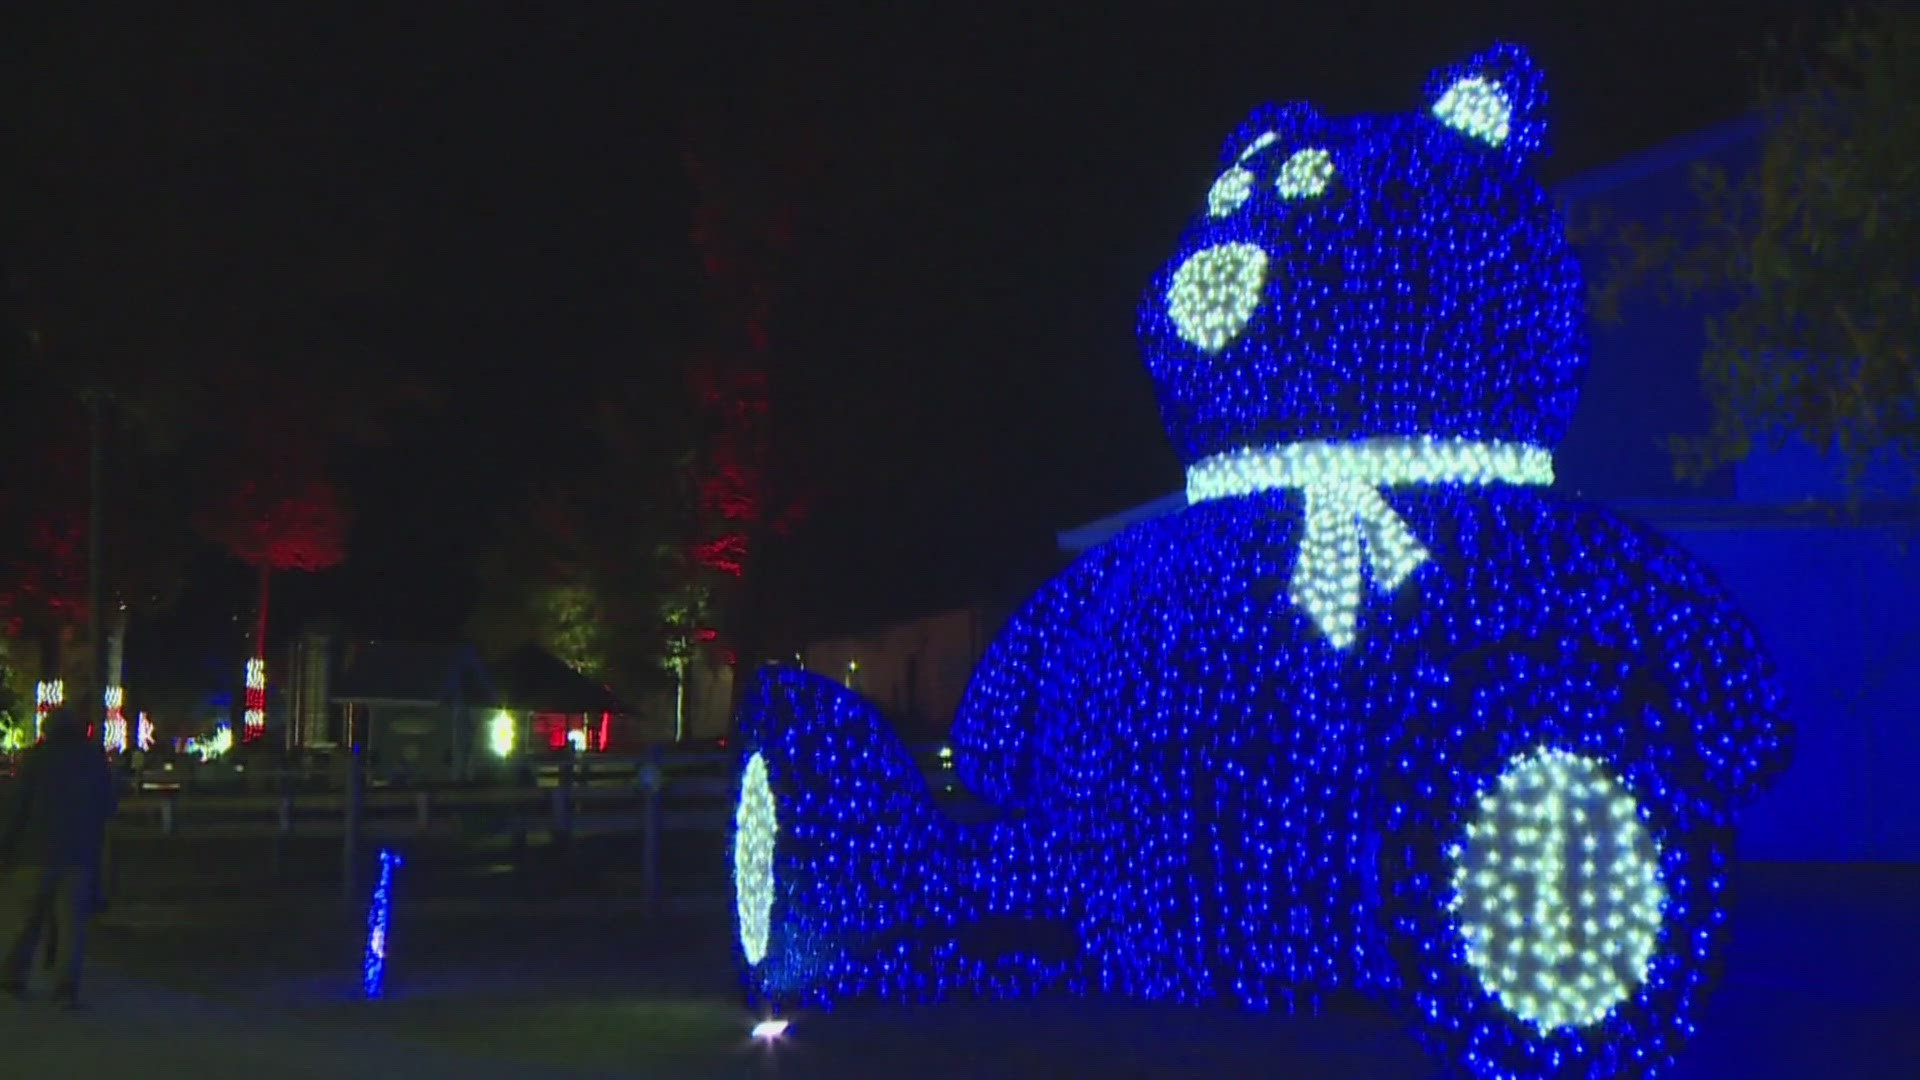 Winter Wonderlights is an outdoor light show experience at the Greensboro Science Center that is sure get you in the holiday spirit.